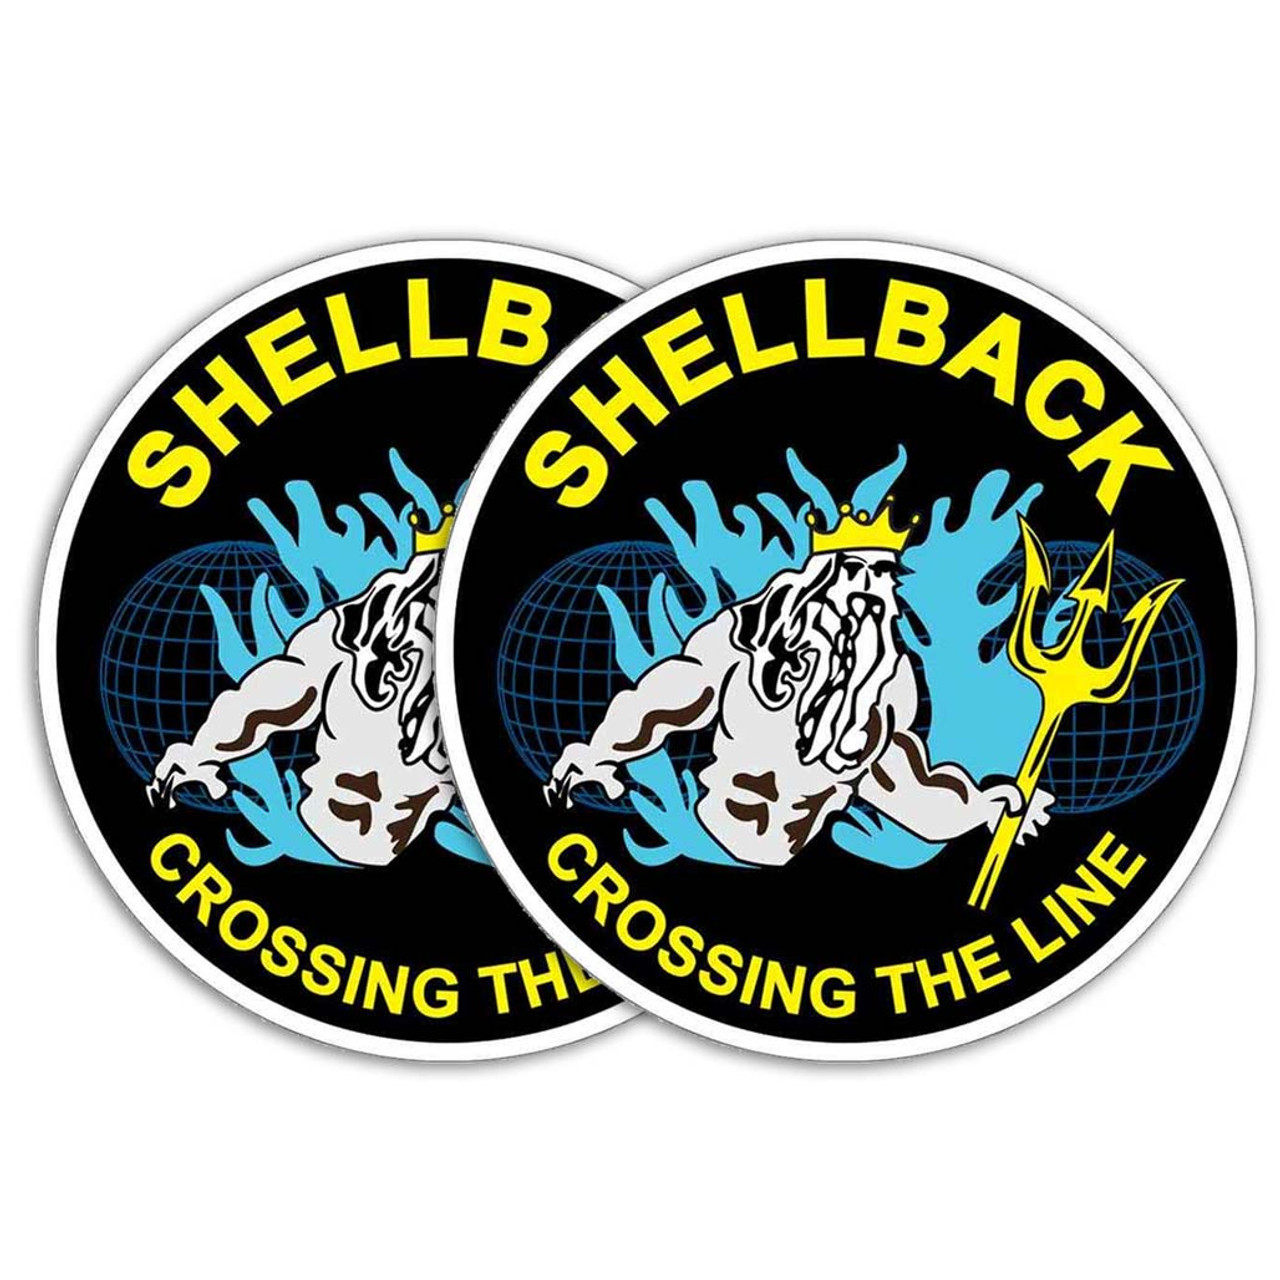 US Navy Shellback, Crossing the Line Circle Decal Quantity of (2)